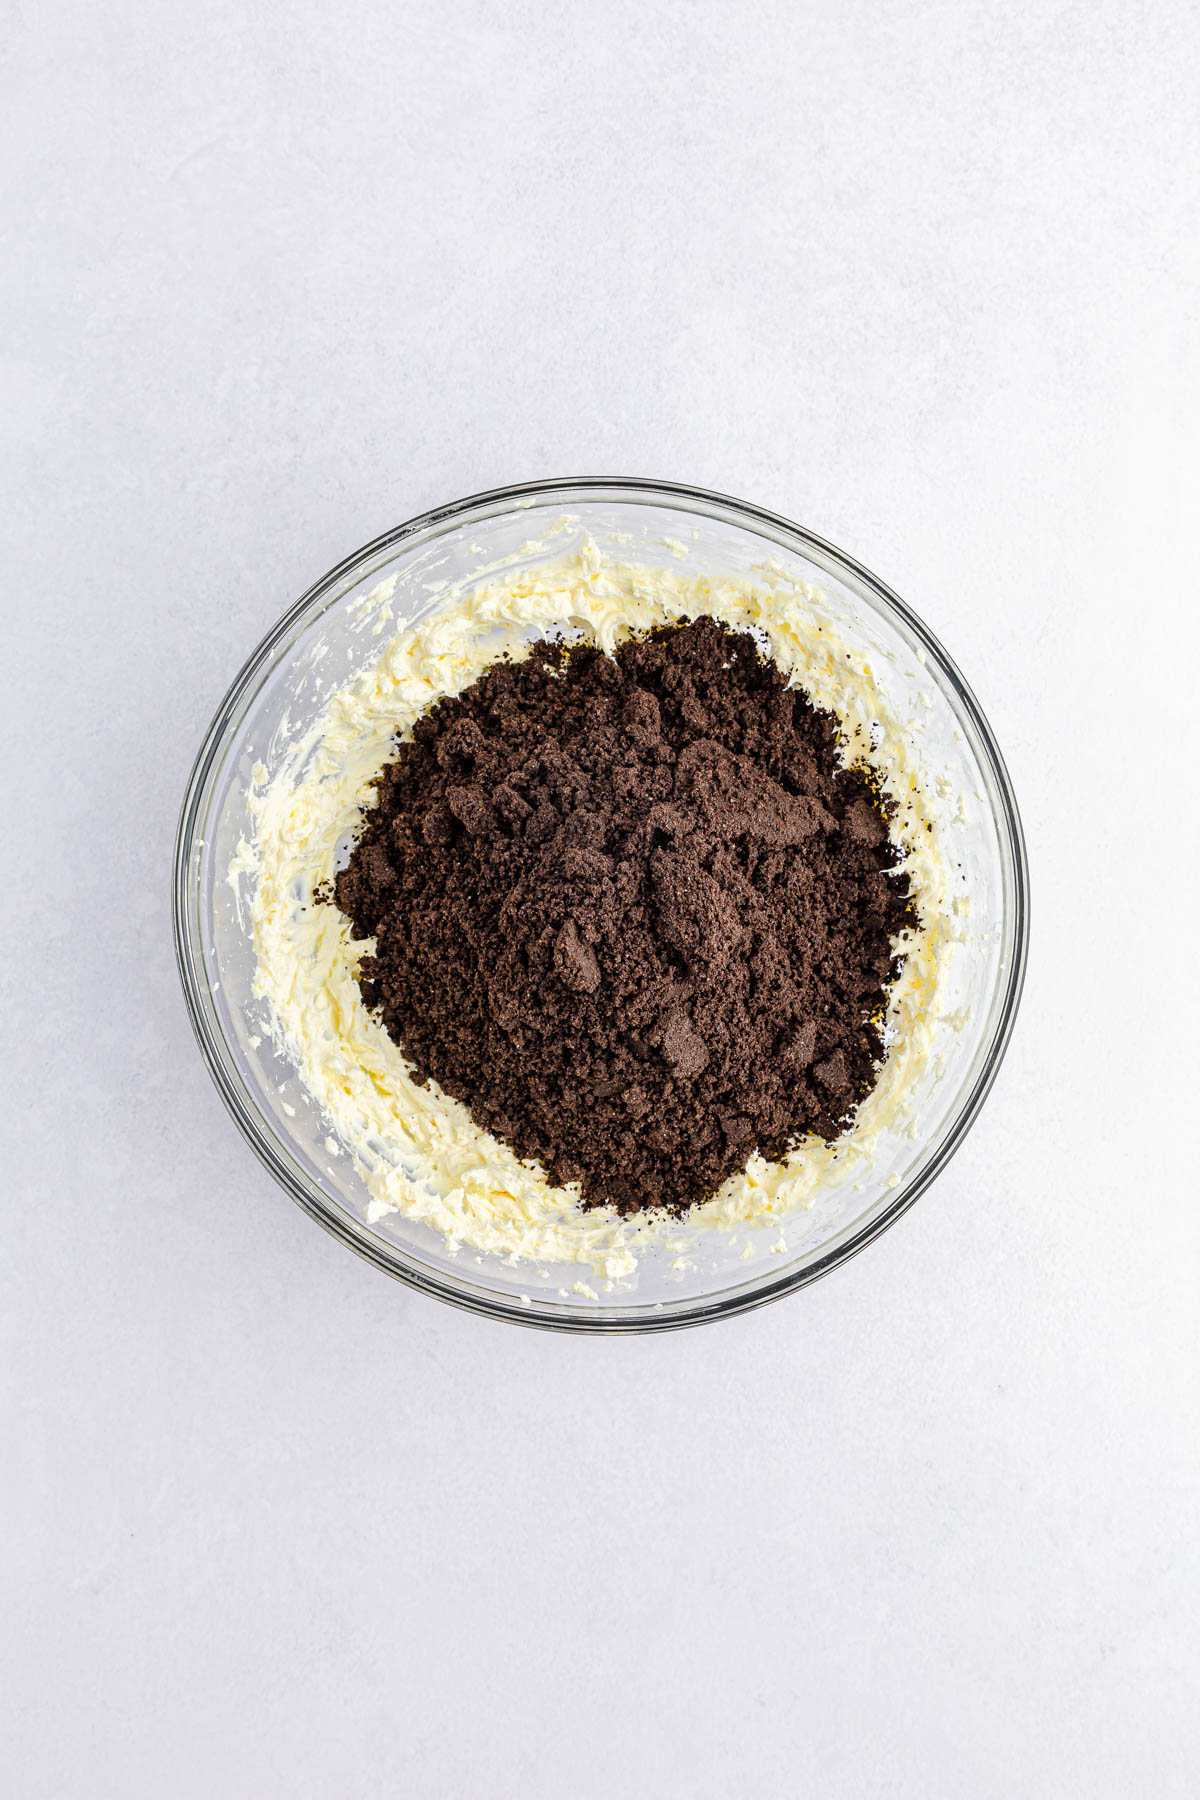 Cream cheese and Oreo cookie crumbs in glass mixing bowl